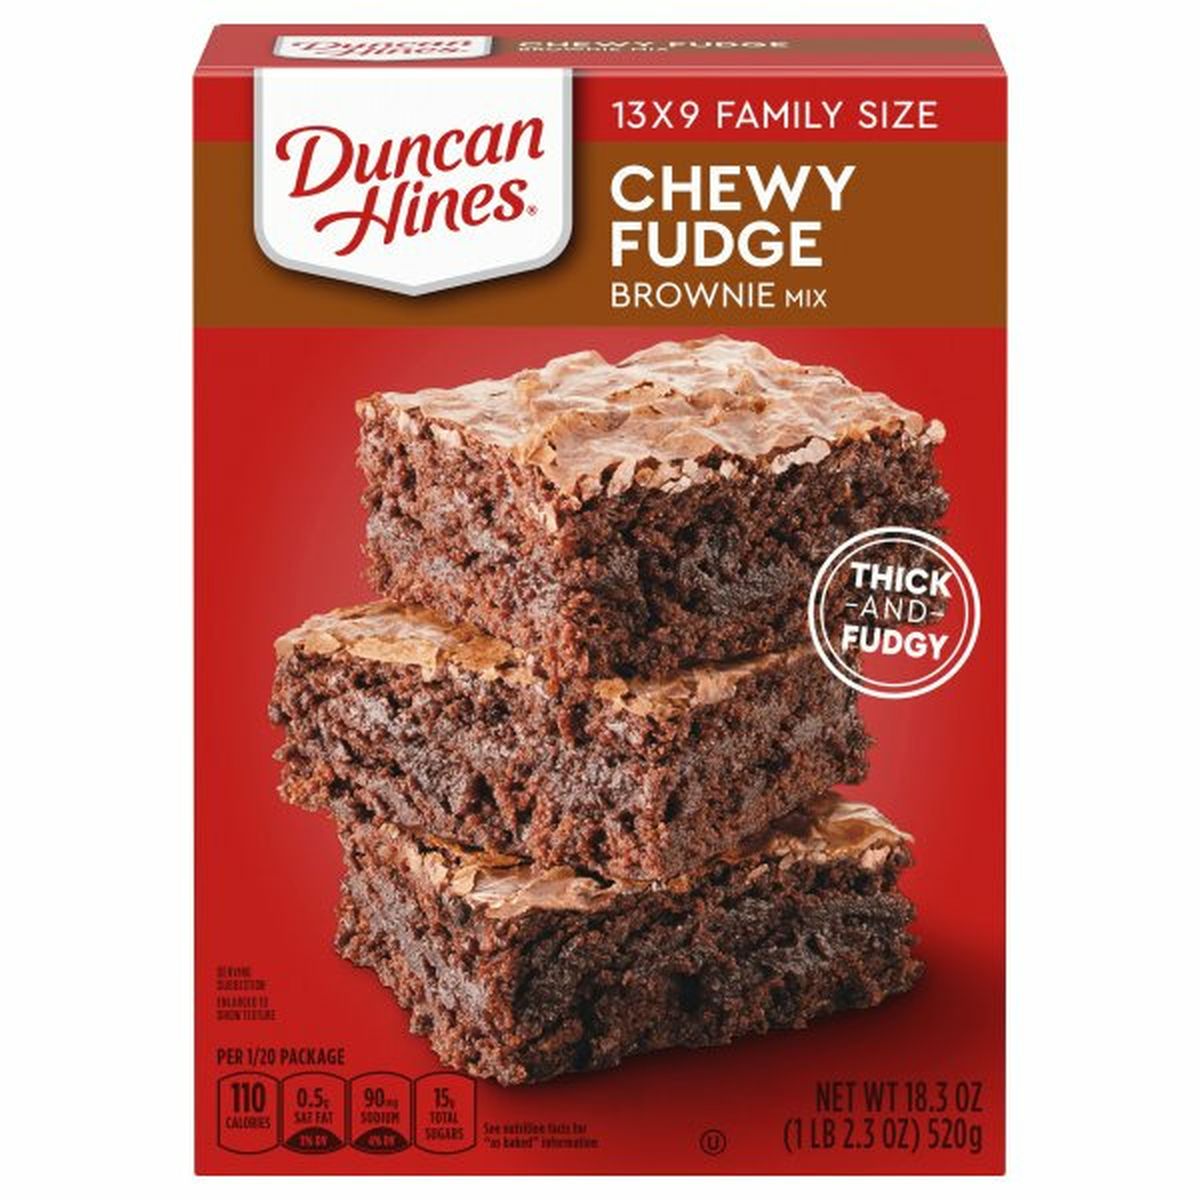 Calories in Duncan Hines Brownie Mix, Chewy Fudge, Family Size